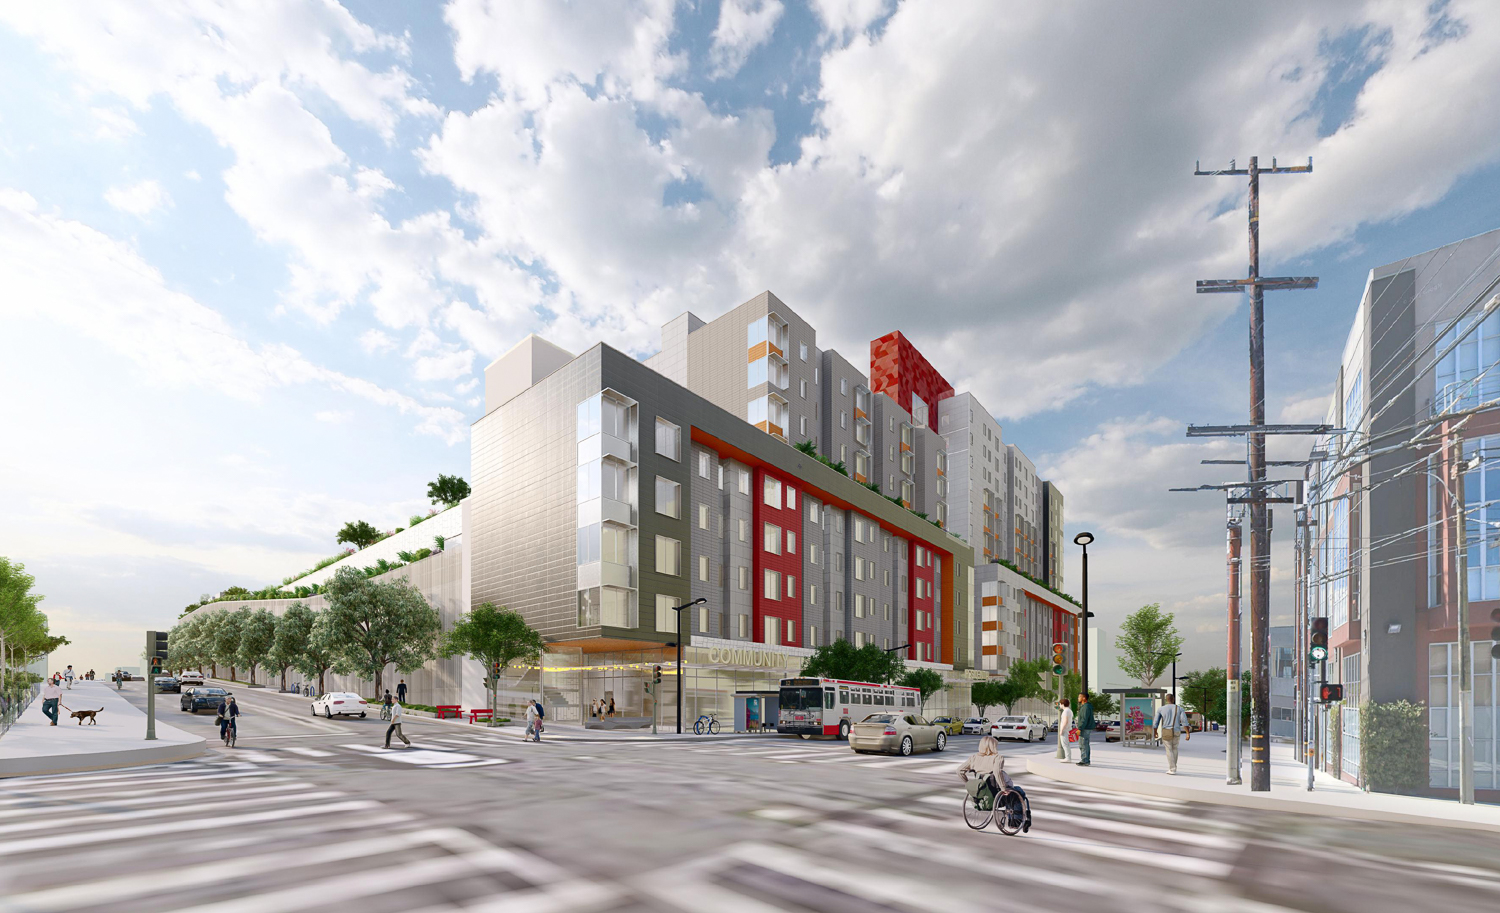 Potrero Yard seen from across 17th Street, rendering by IBI Group